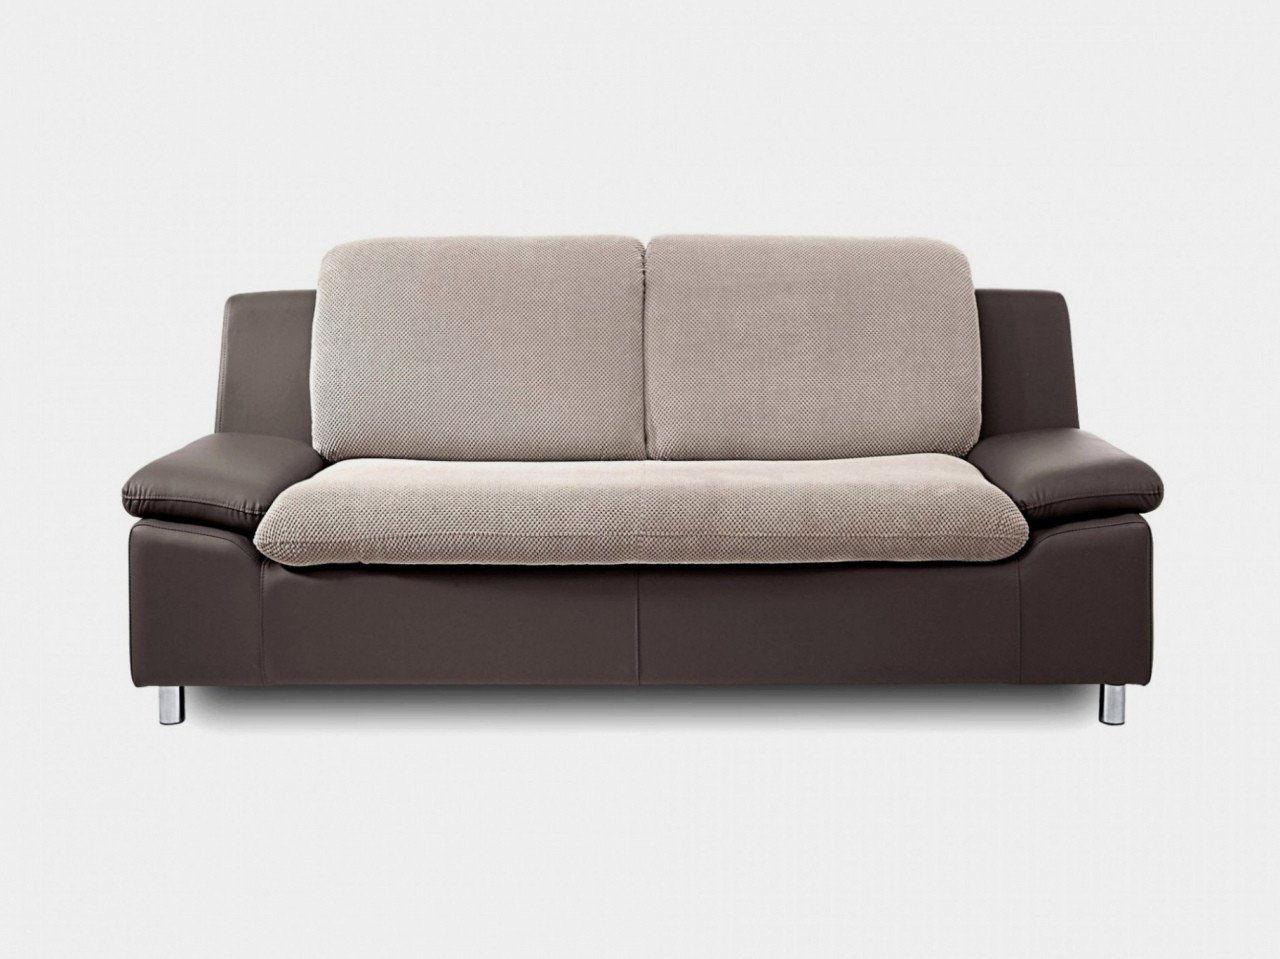 Sofa Bed for Bedroom Elegant sofa with Bed sofa Bed Frisch istikbal Couch Luxus